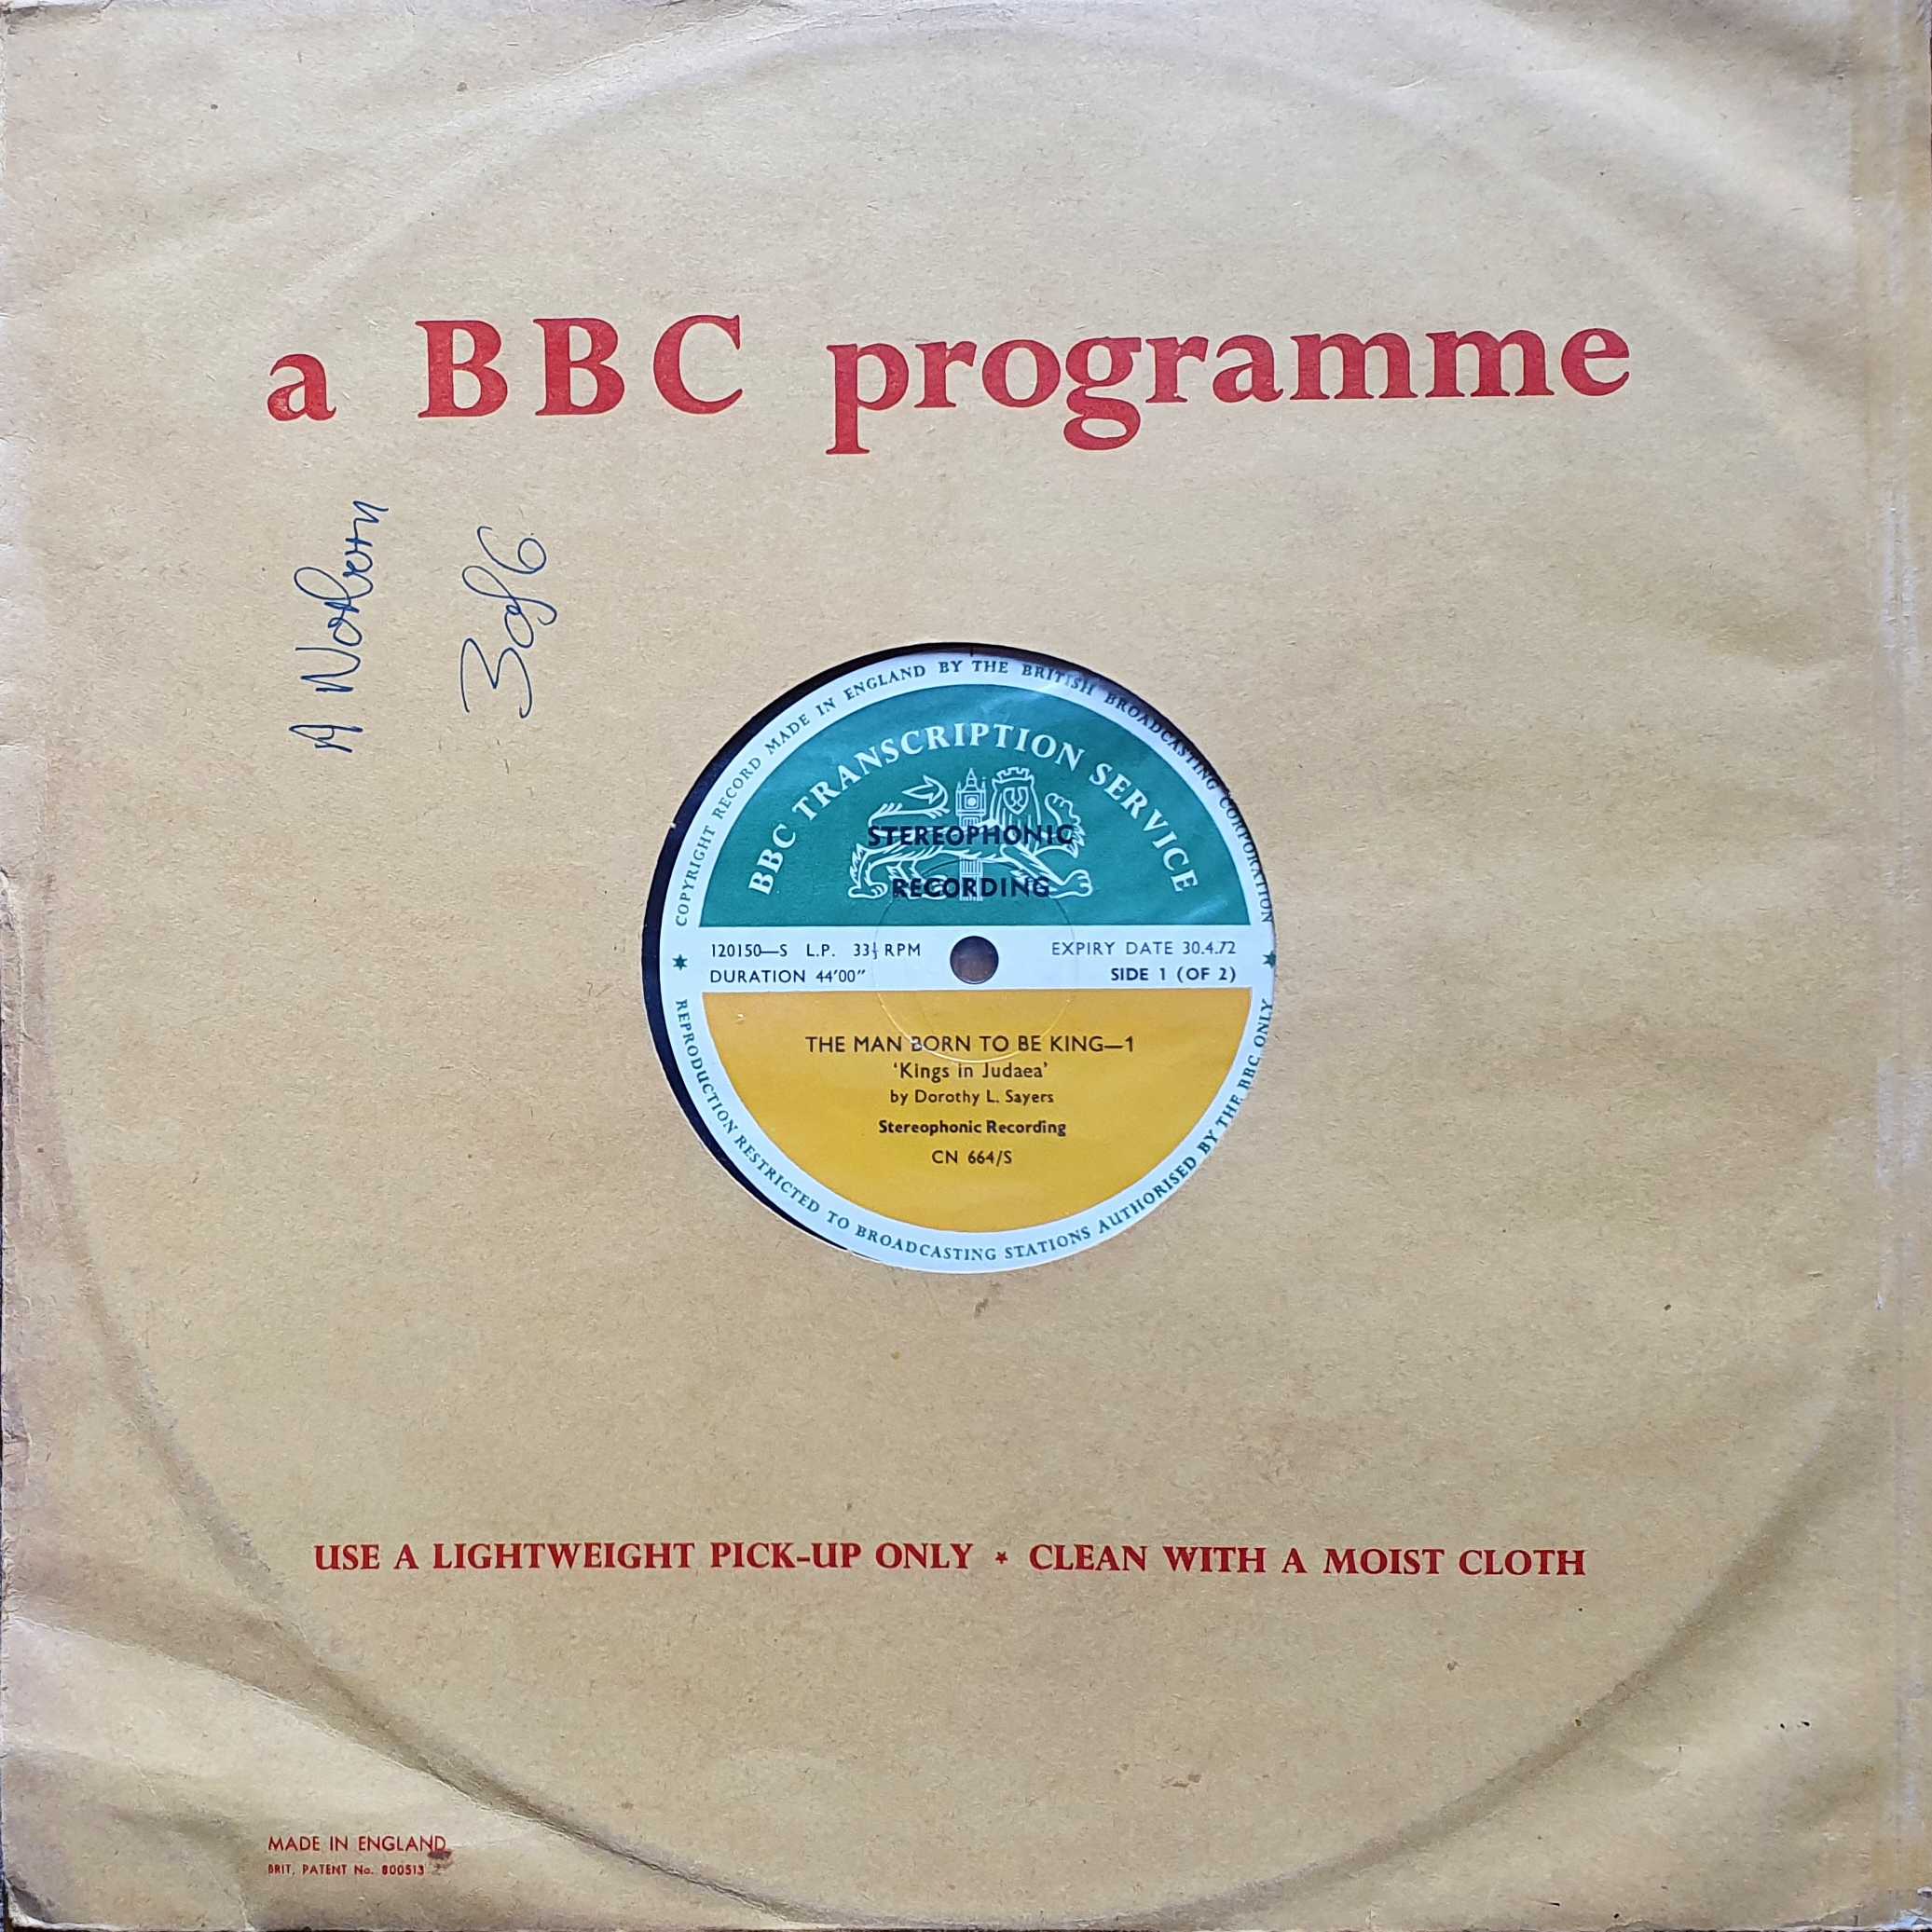 Picture of CN 664 S 1 The man born to be king 1 & 2 (Sides 1 only) by artist Dorothy L. Sayers from the BBC albums - Records and Tapes library